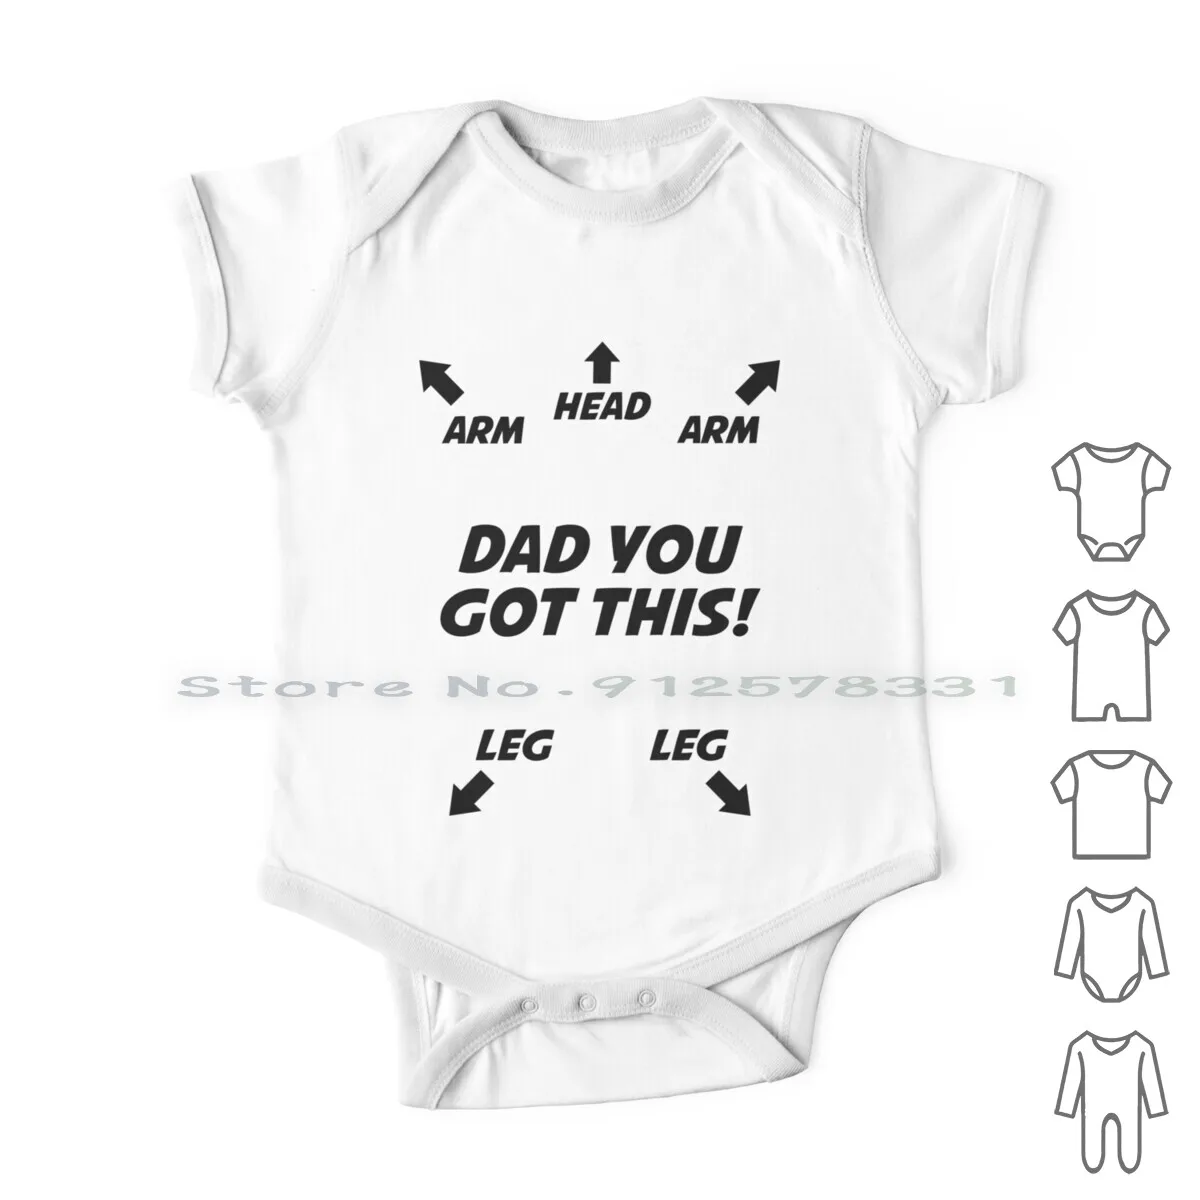 

Dad You Got This-Funny Newborn Outfit Cute Baby Cothes Newborn Baby Clothes Rompers Cotton Jumpsuits Newborns Newborn Baby